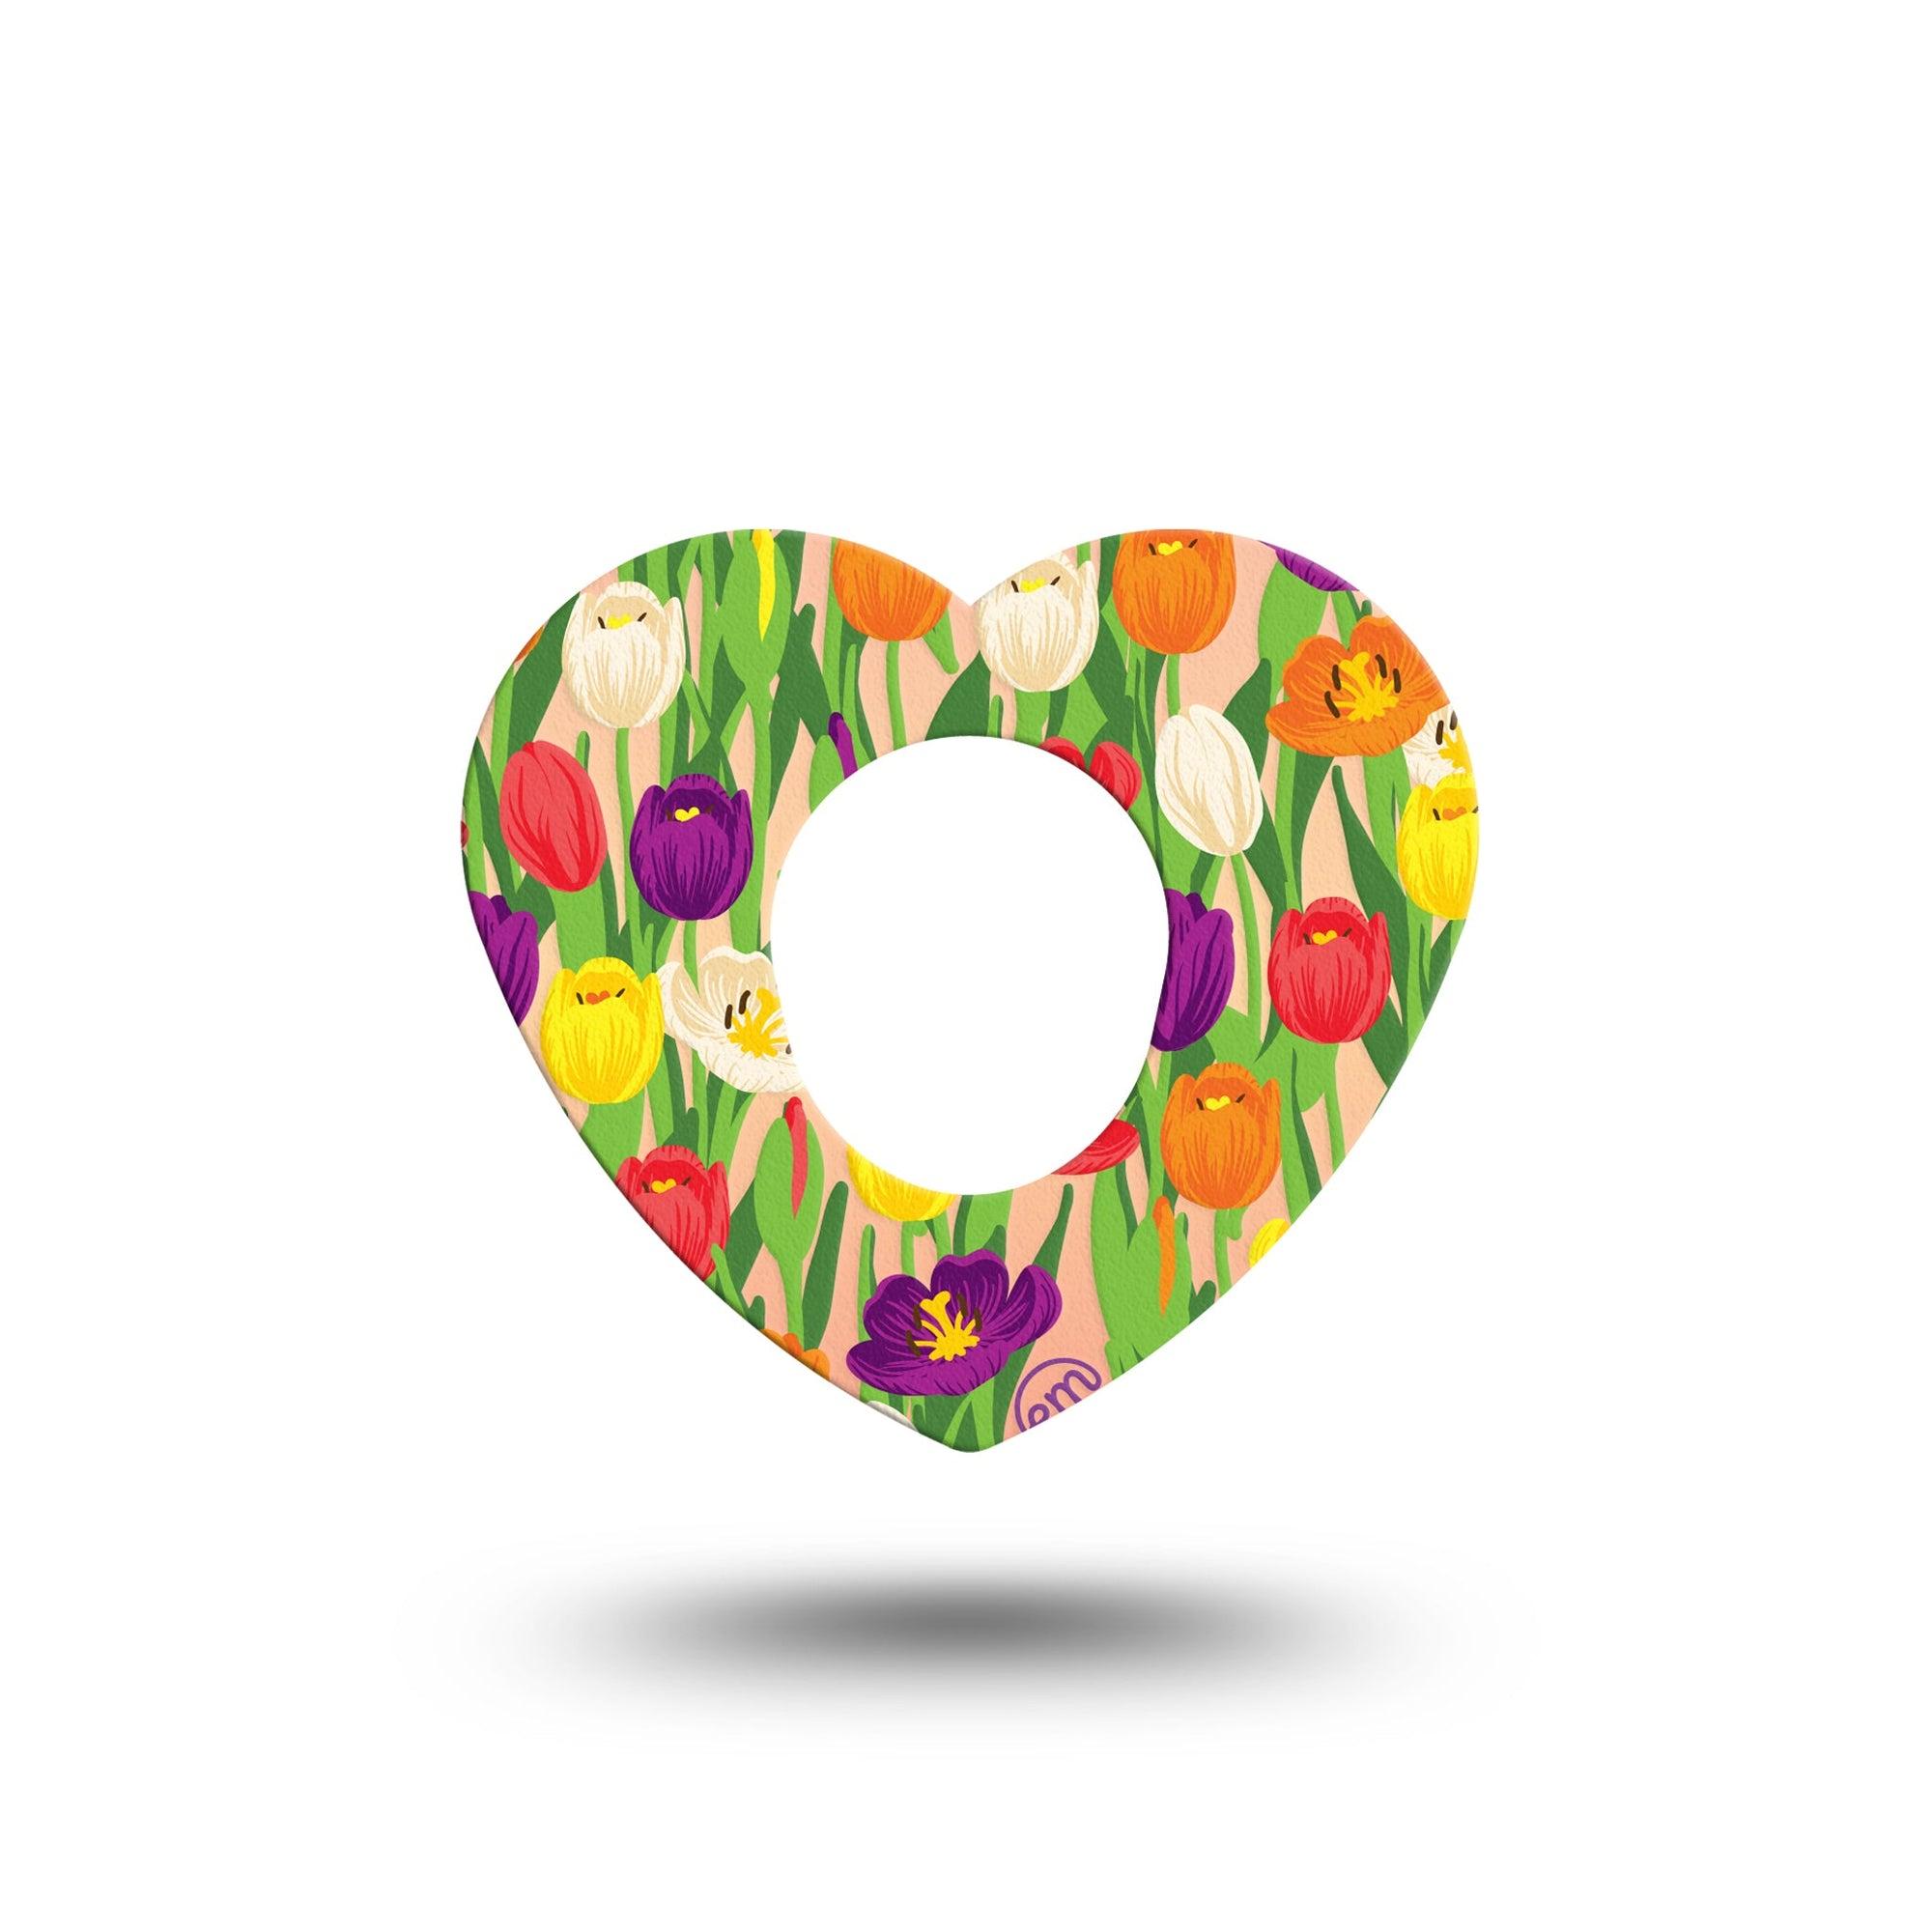 ExpressionMed Tulips Heart Dexcom G7 Tape, Single, Spring Blooms Themed, CGM Heart Shaped Plaster Patch Design